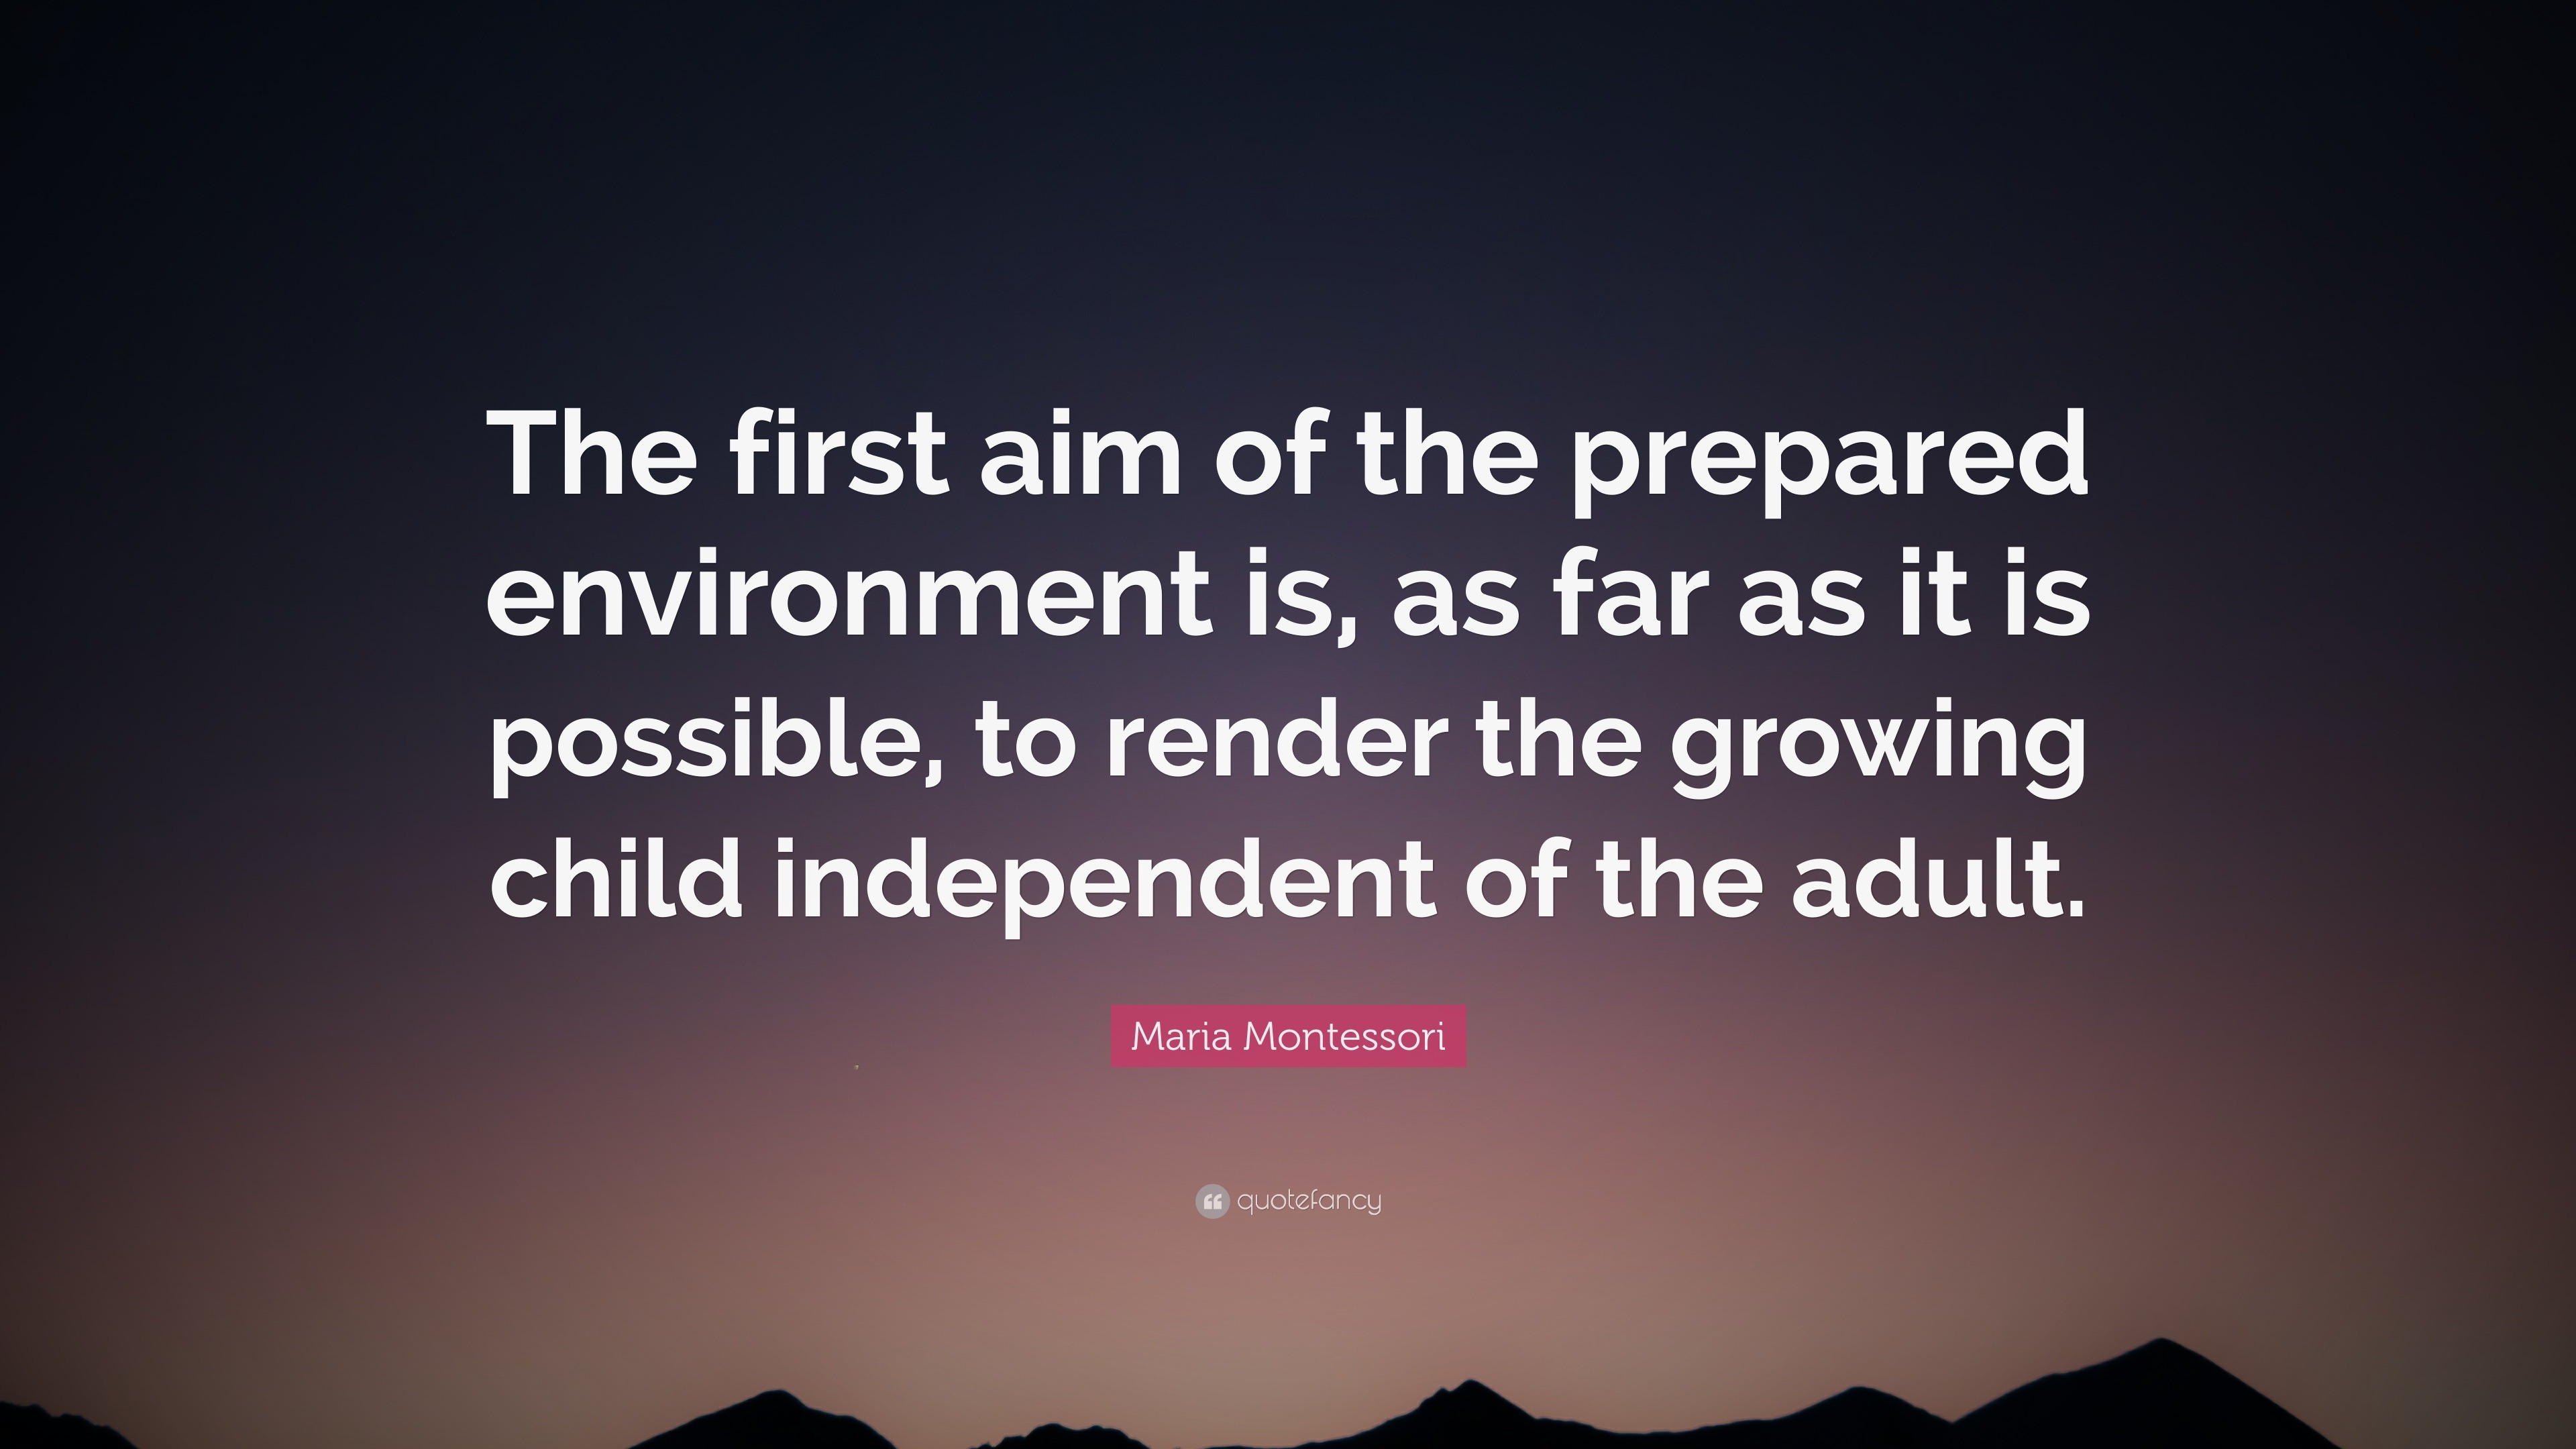 Maria Montessori Quote: “The first aim of the prepared environment is